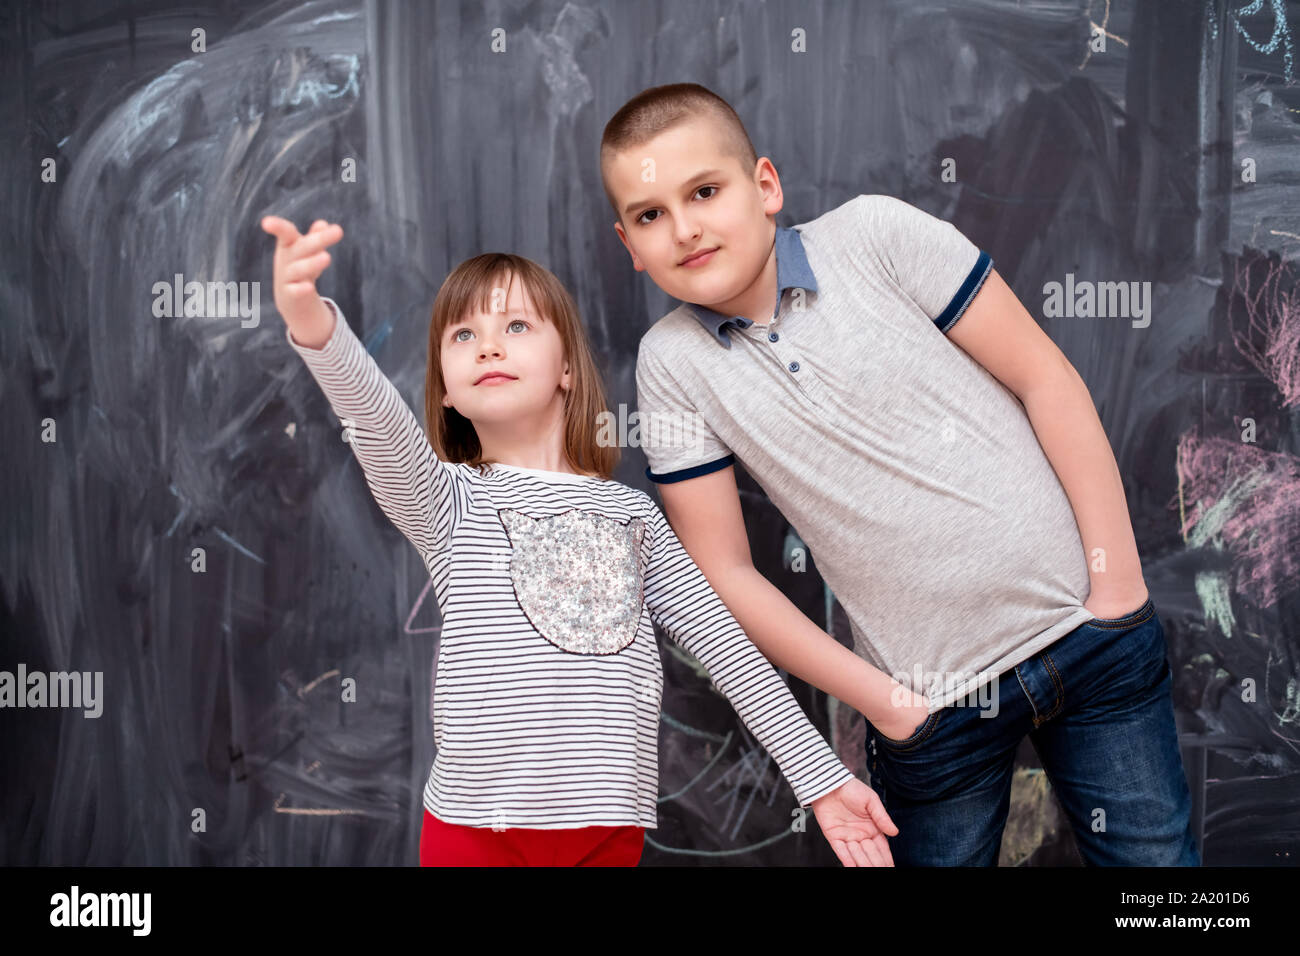 group portrait of happy childrens boy and little girl standing in front of black chalkboard Stock Photo